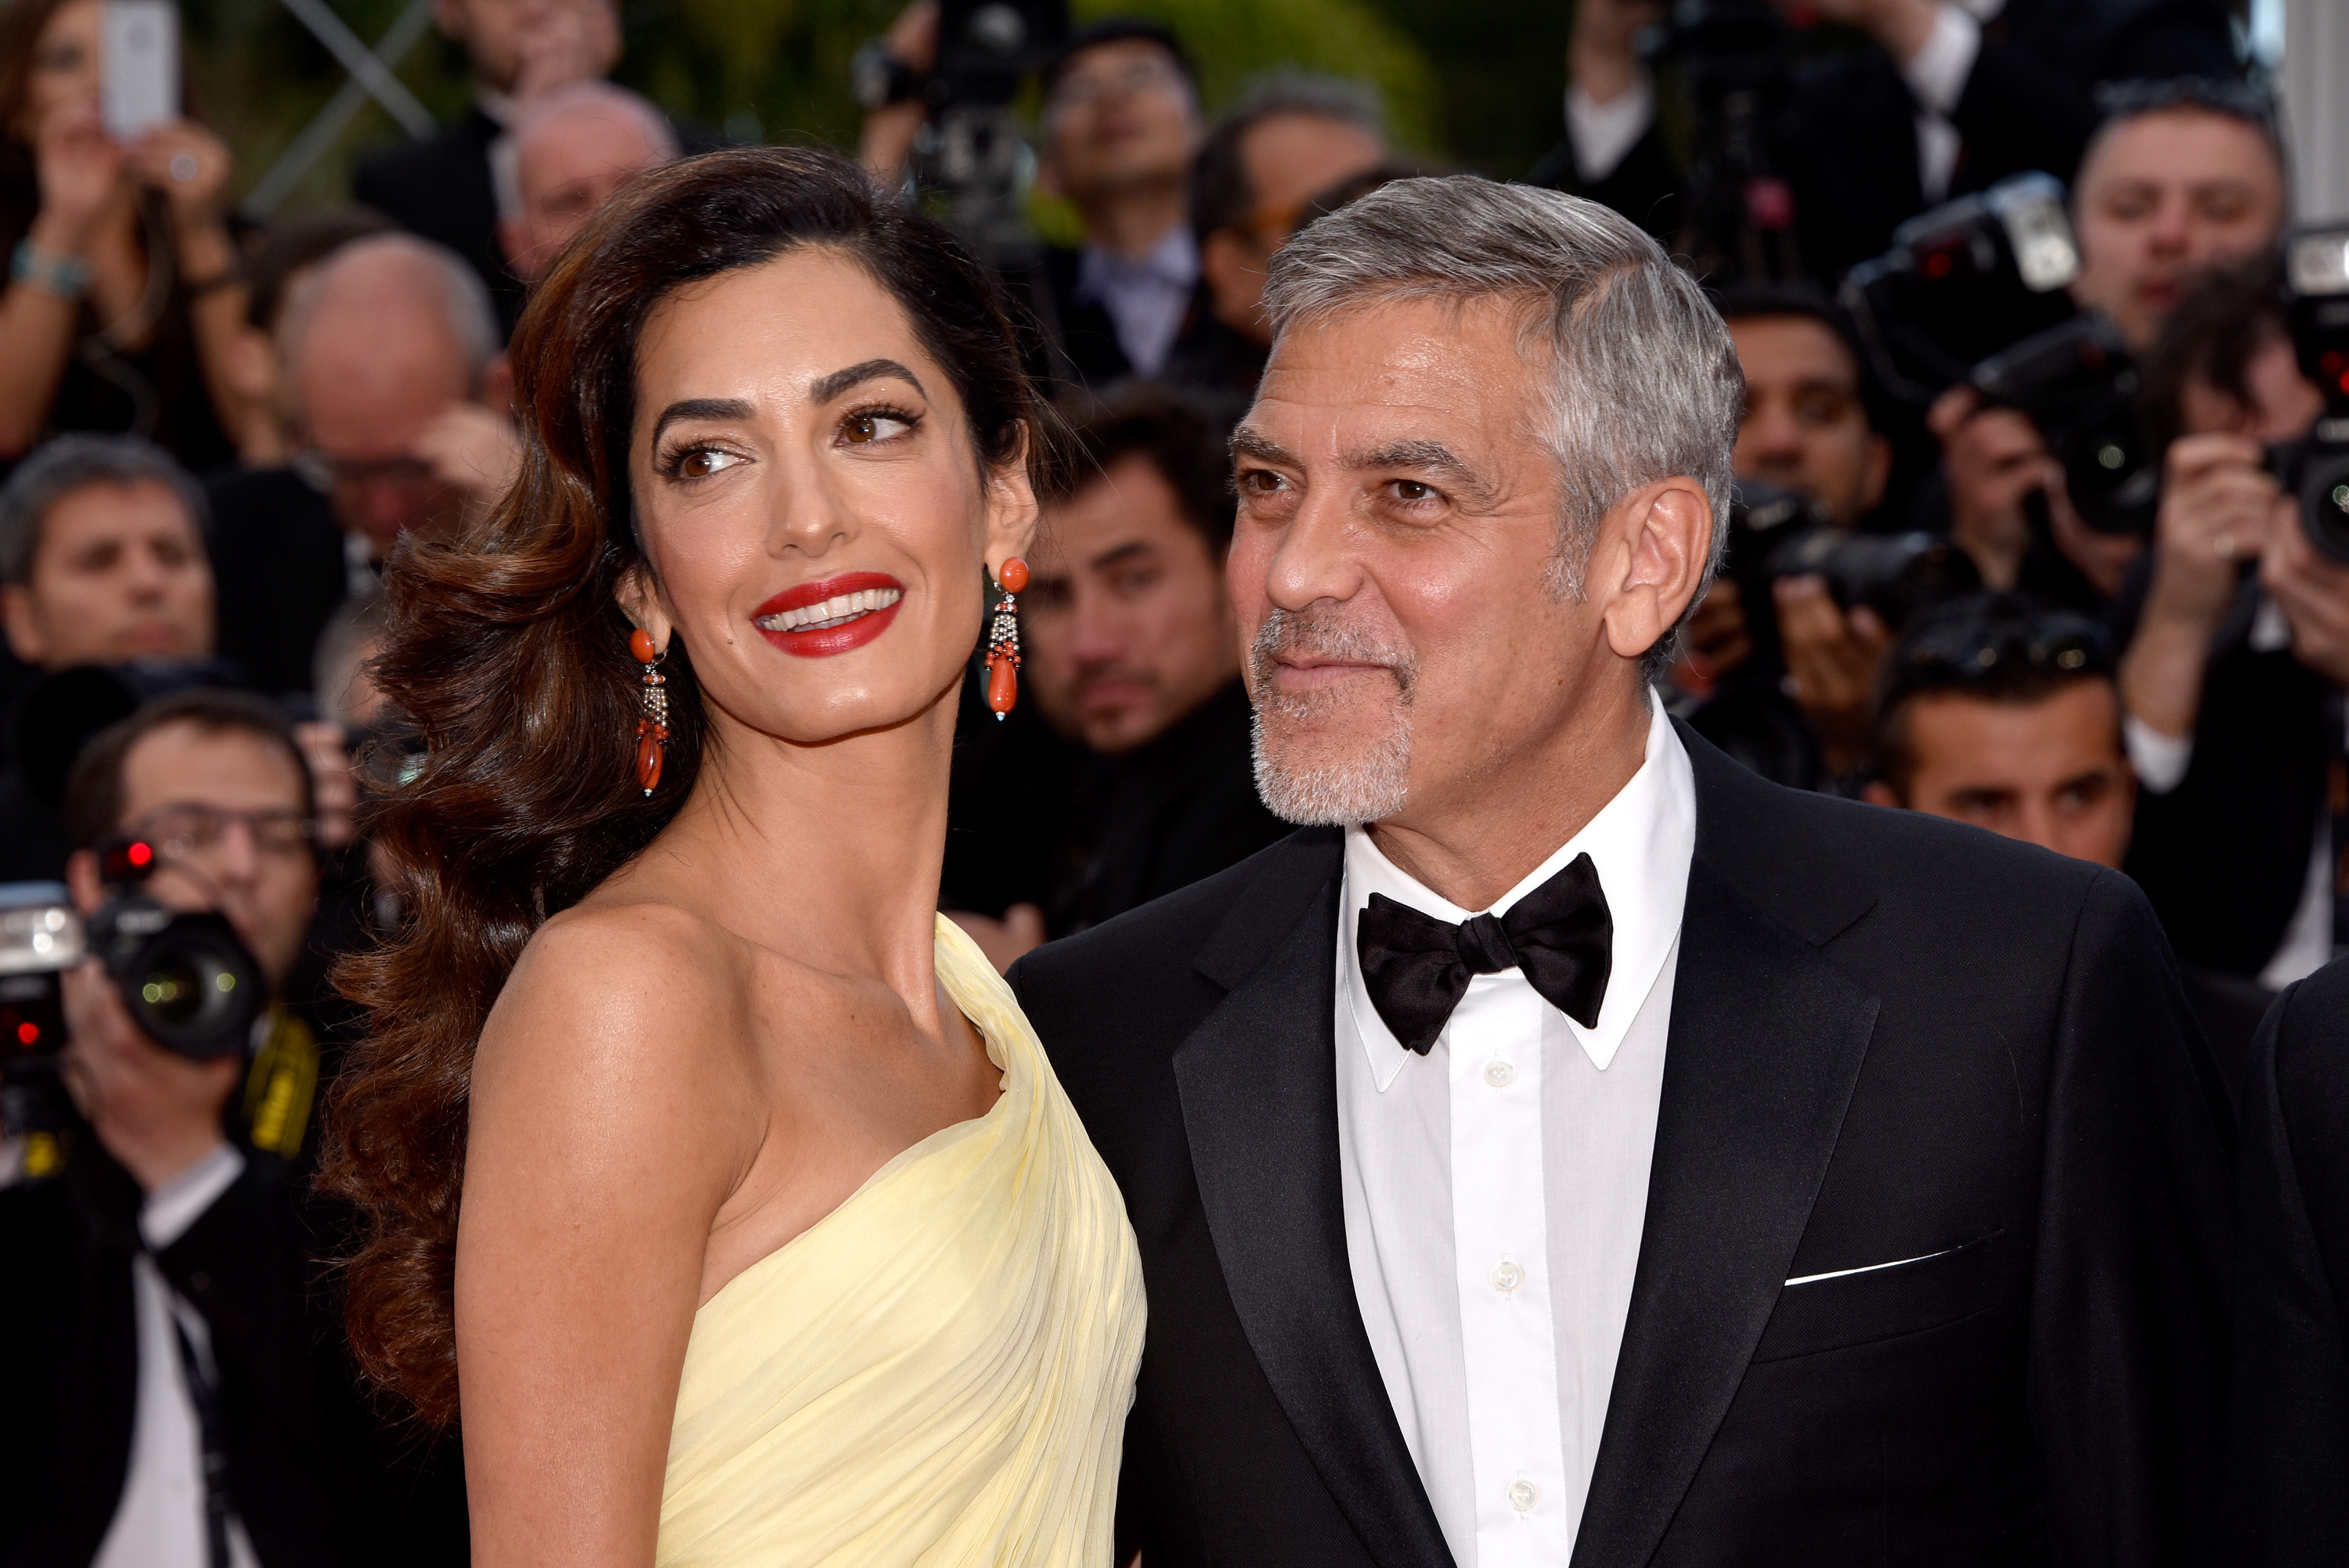 Amal and George Clooney at the premiere of "Money Monster" during the 69th annual Cannes Film Festival in Cannes, France on May 12, 2016 | Source: Getty Images